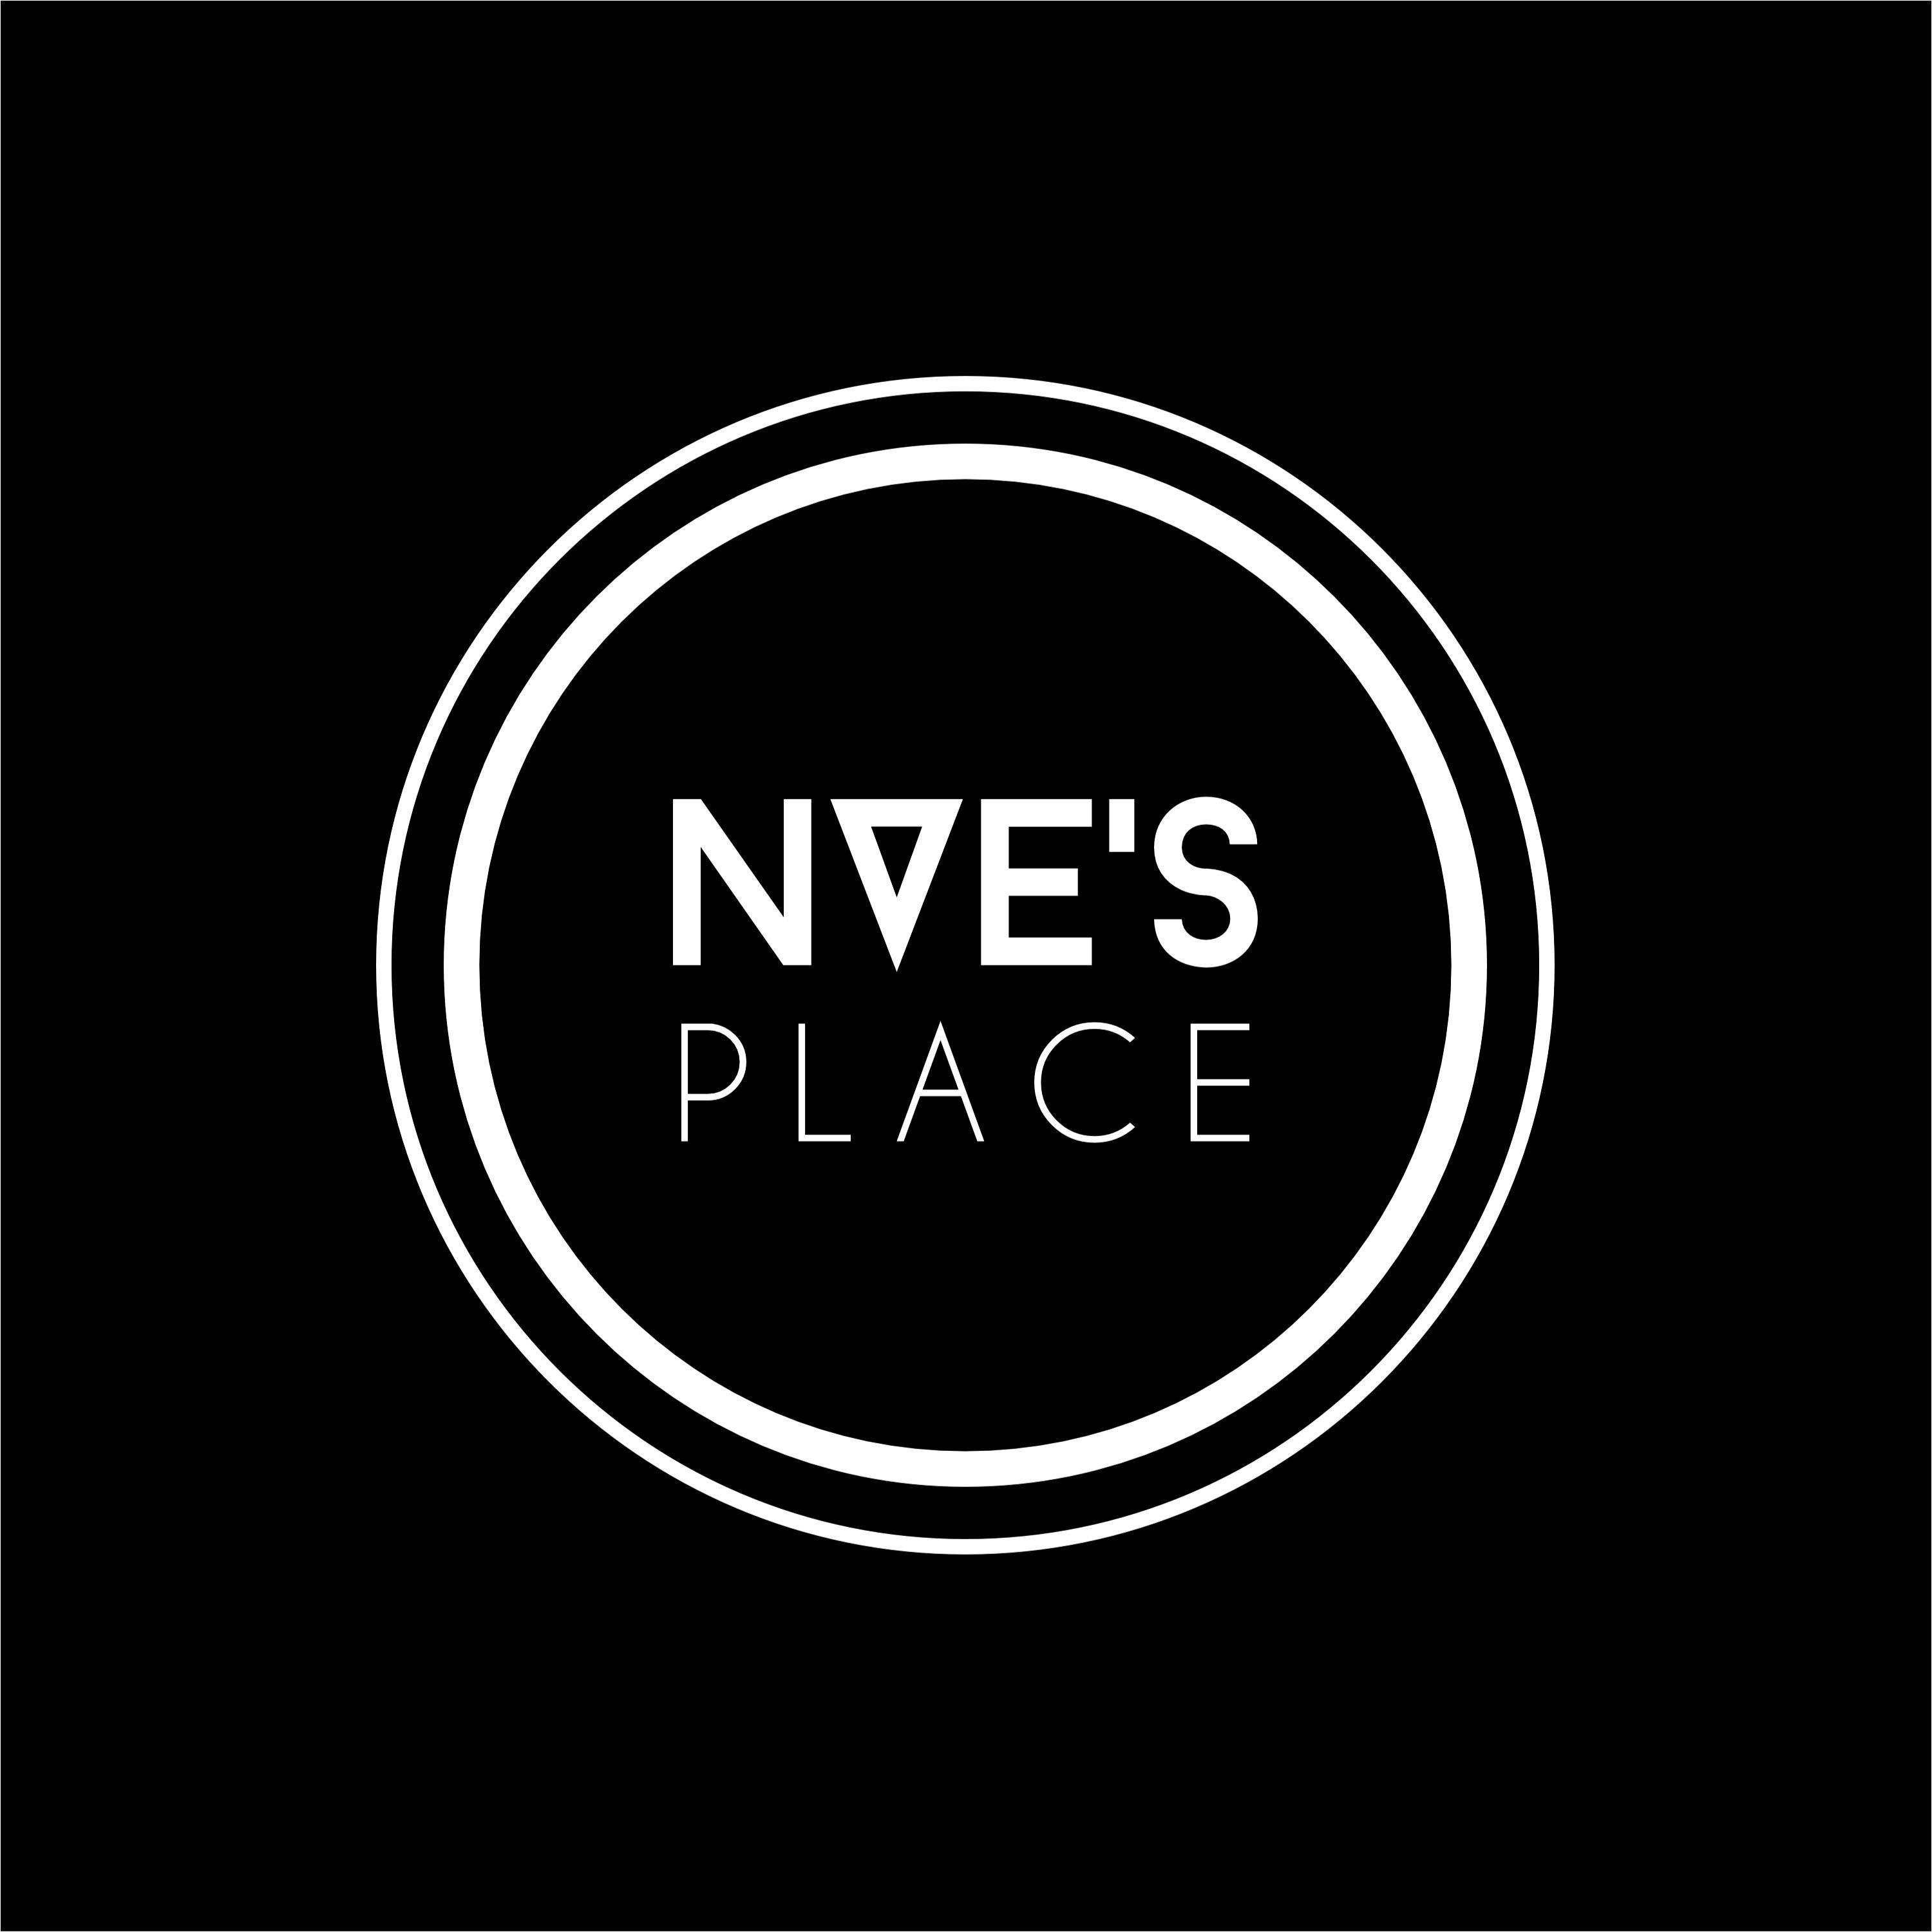 Nae's Place